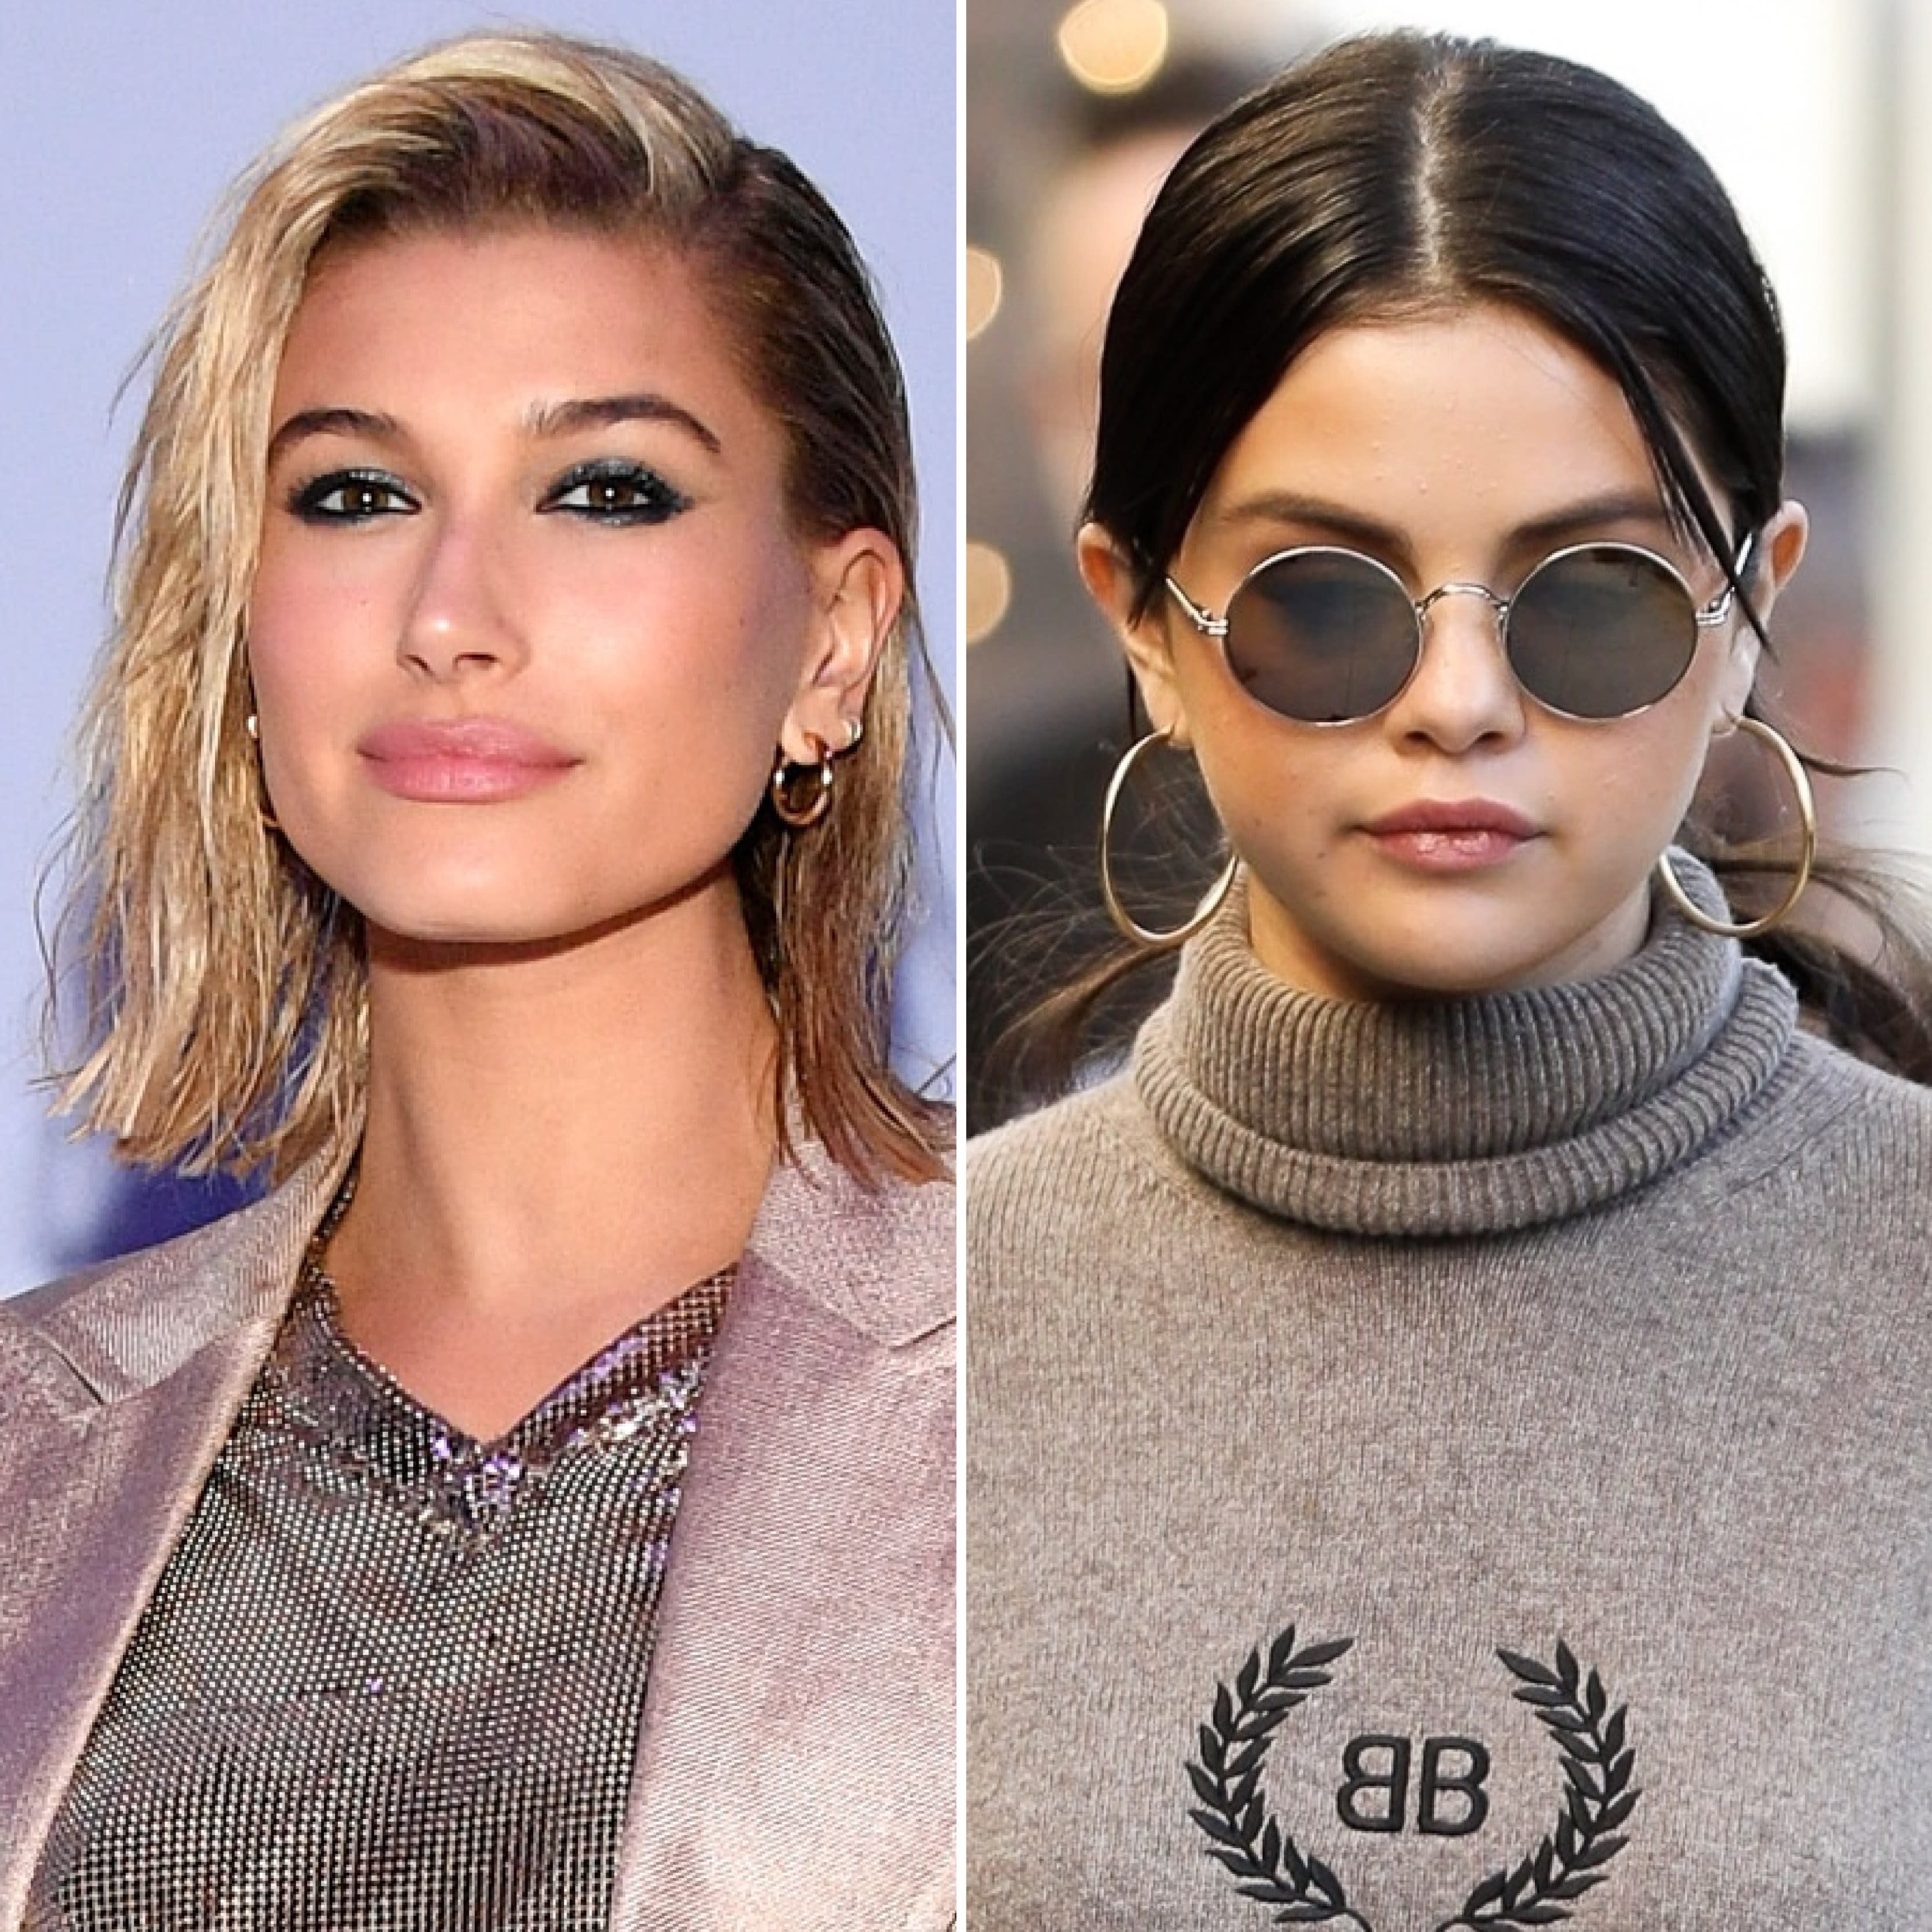 Selena Gomez And Hailey Bieber Wore The Same Outfit And Both Looked Amazing 